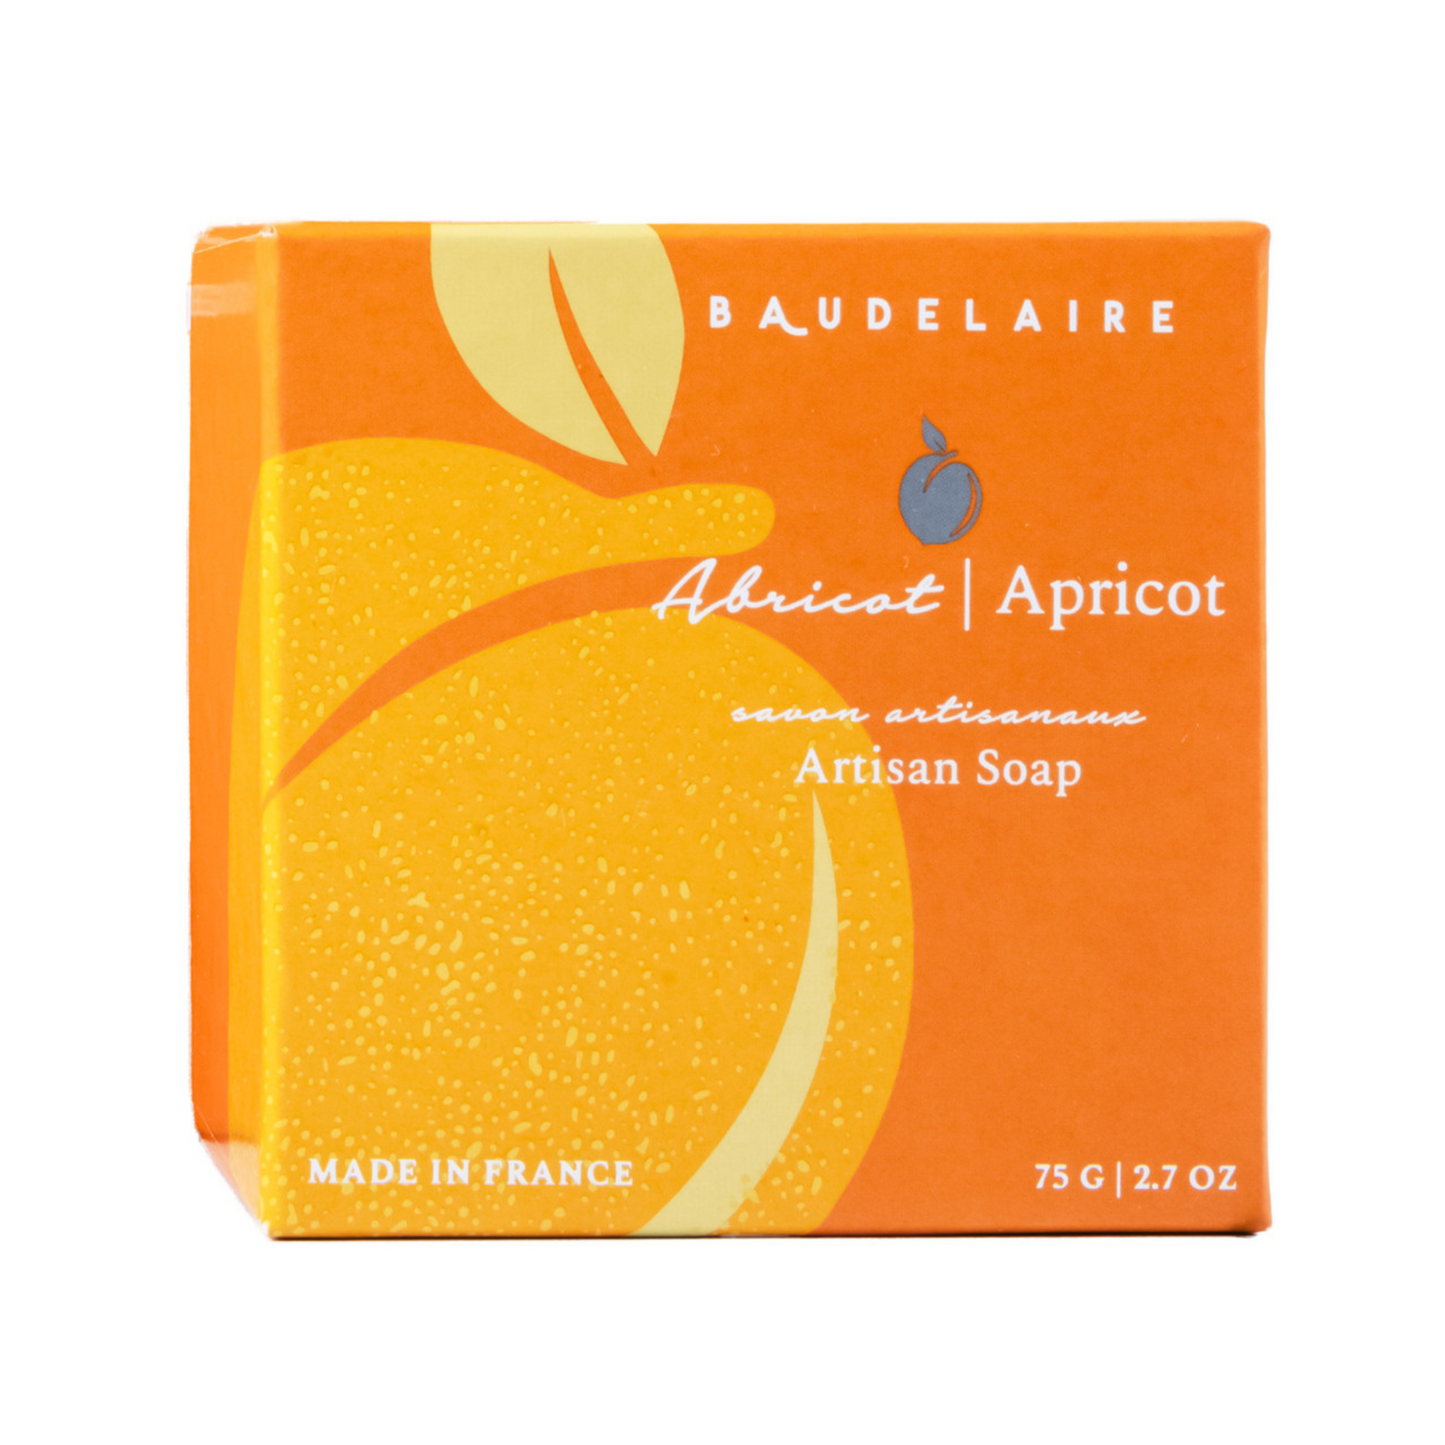 Primary image of Apricot Gift Soap (2 bar set)